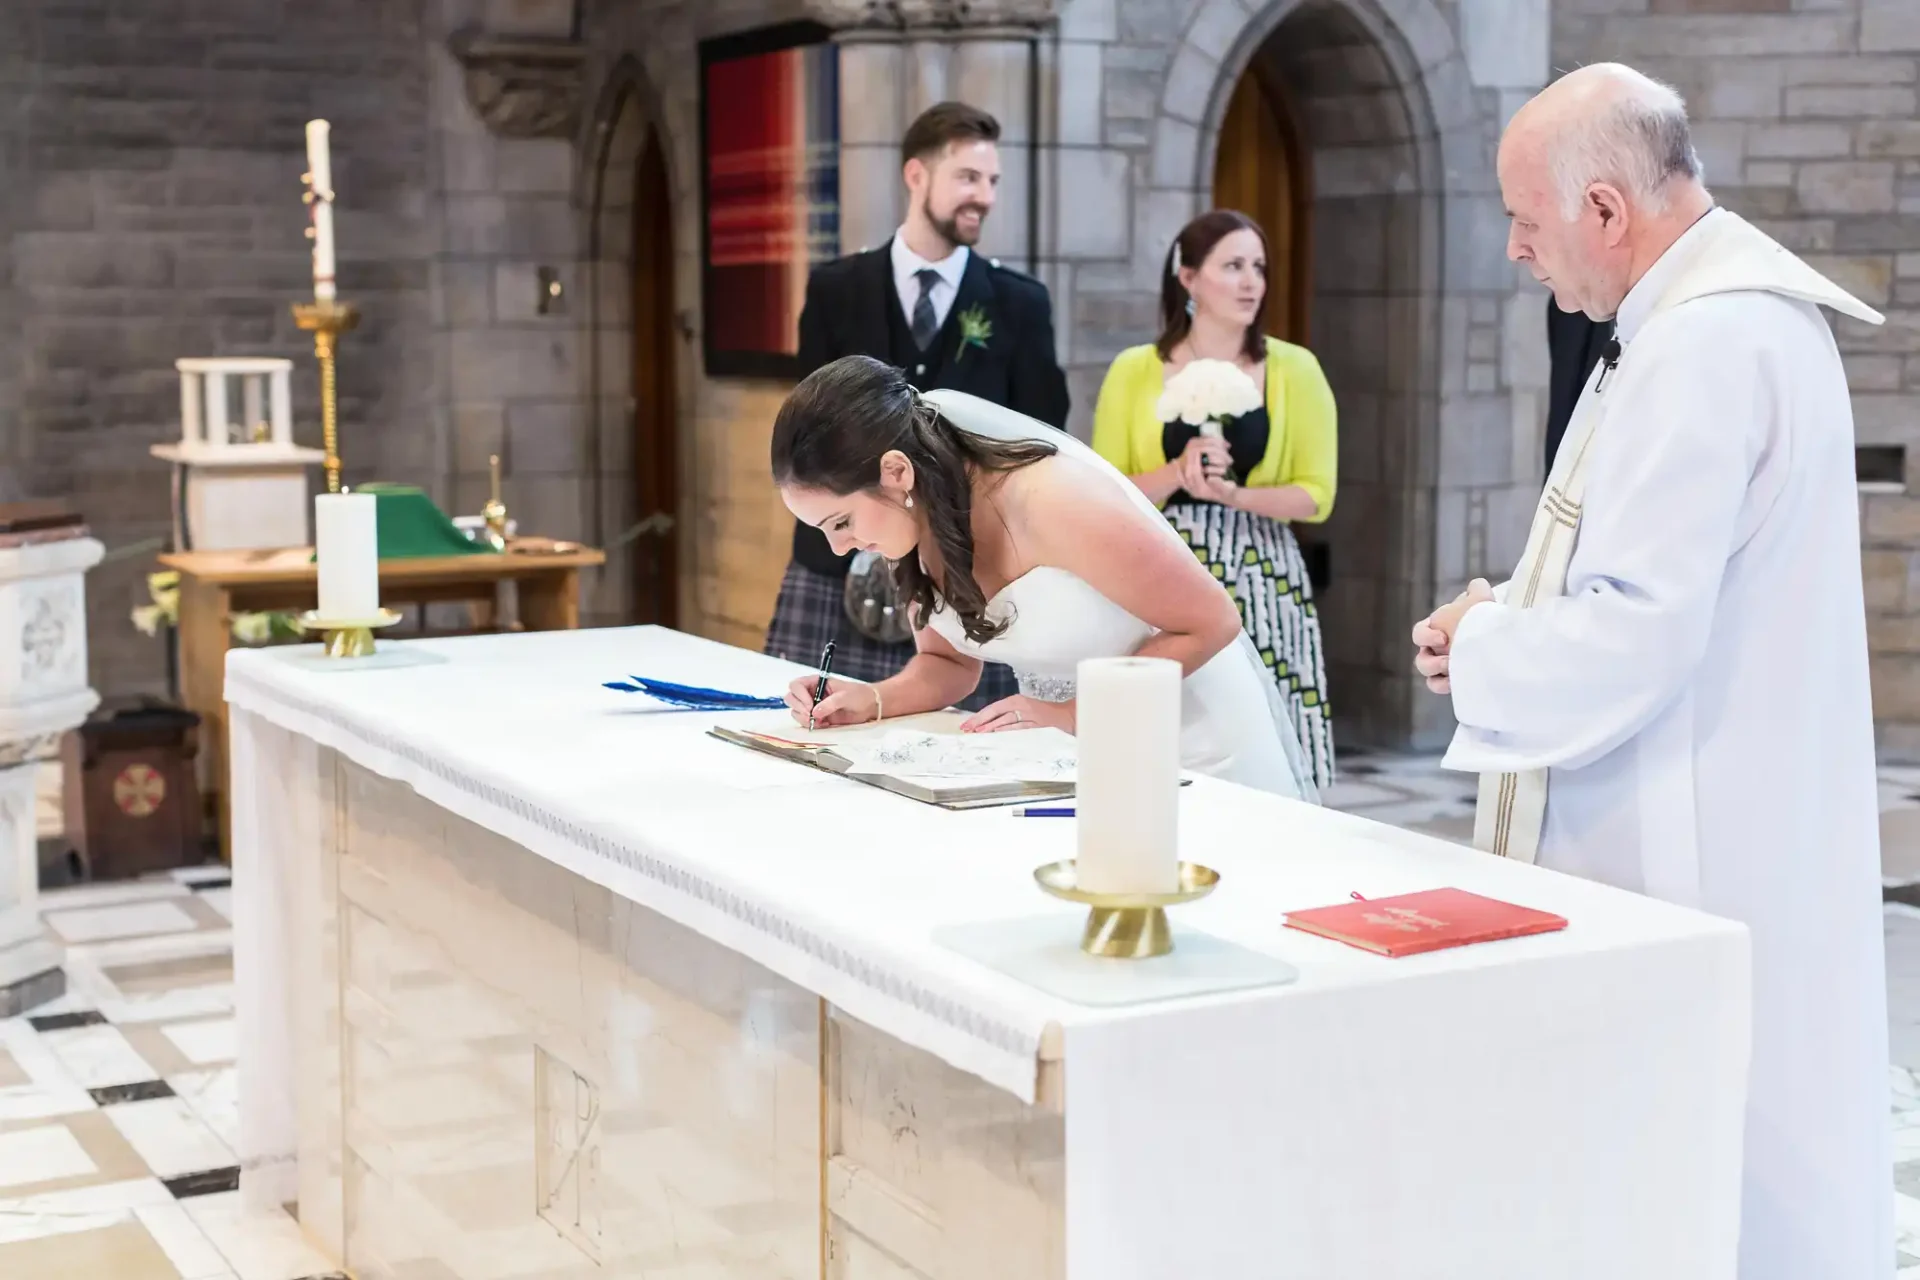 A bride signs a marriage document at a church altar, watched by a priest and a couple standing in the background.